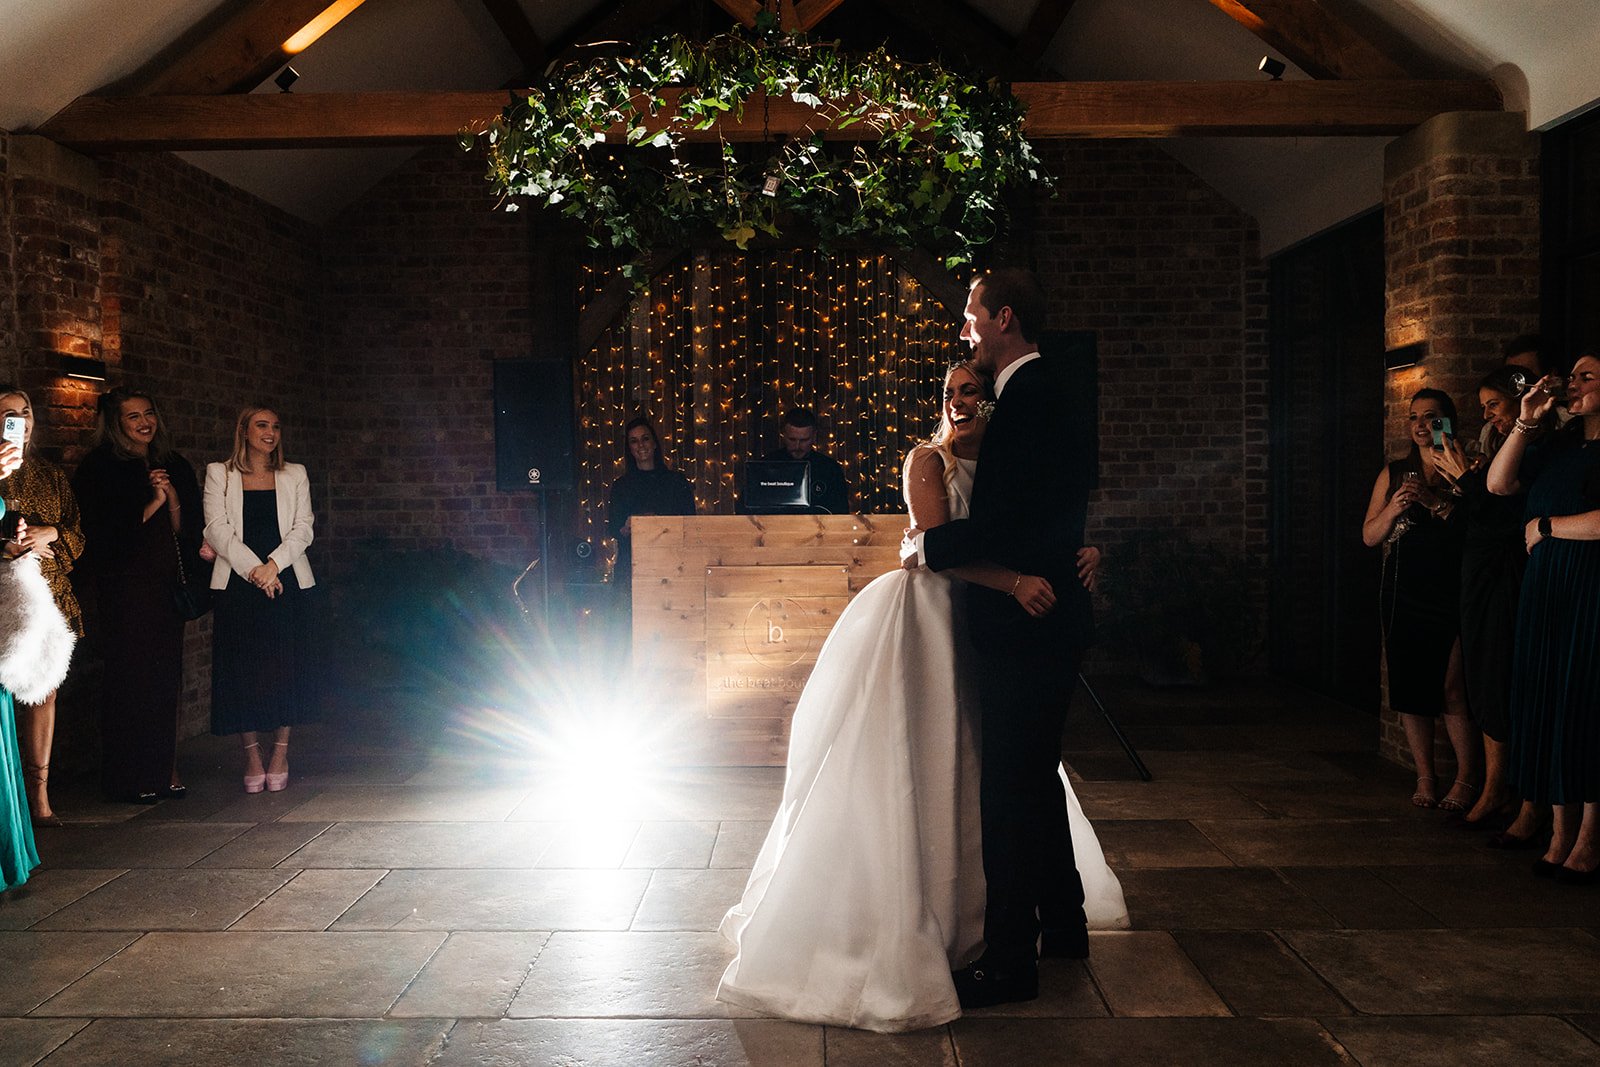 Bride and groom have their first dance in a barn ceremony room with a DJ behind them